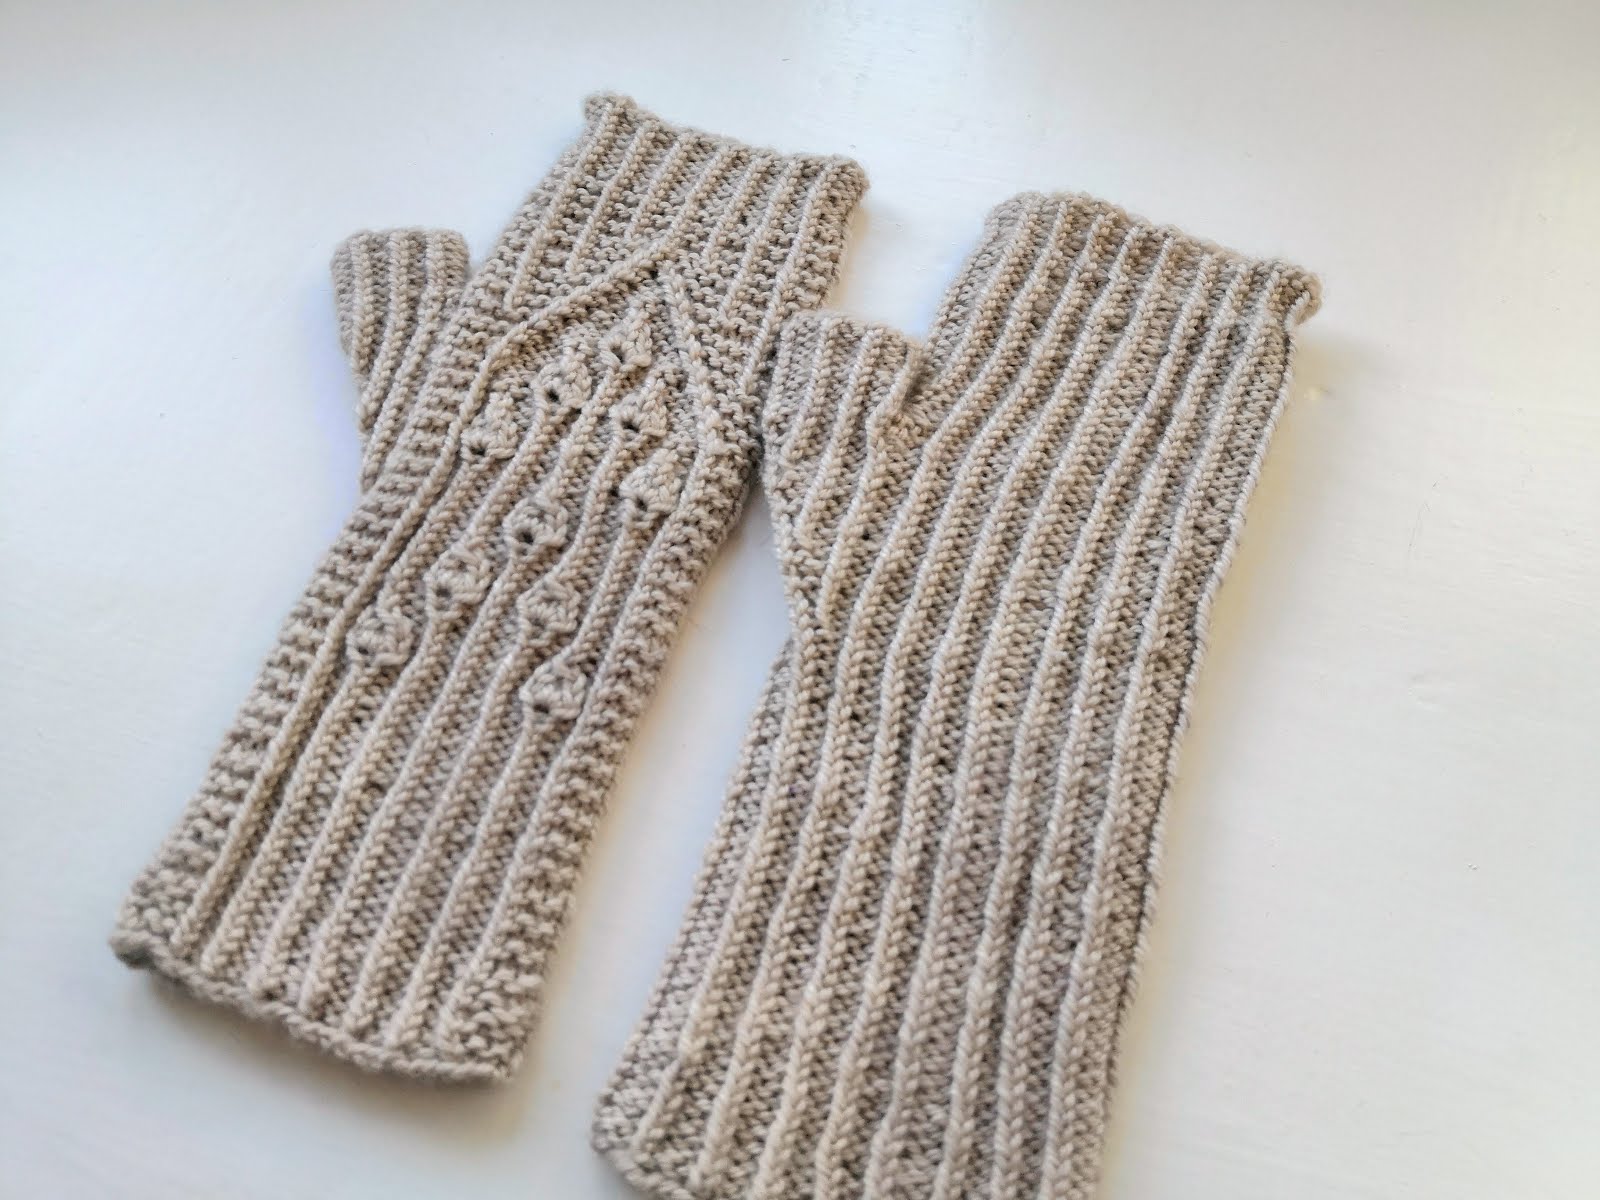 Knitting needles for socks - which should you pick for your first pair?